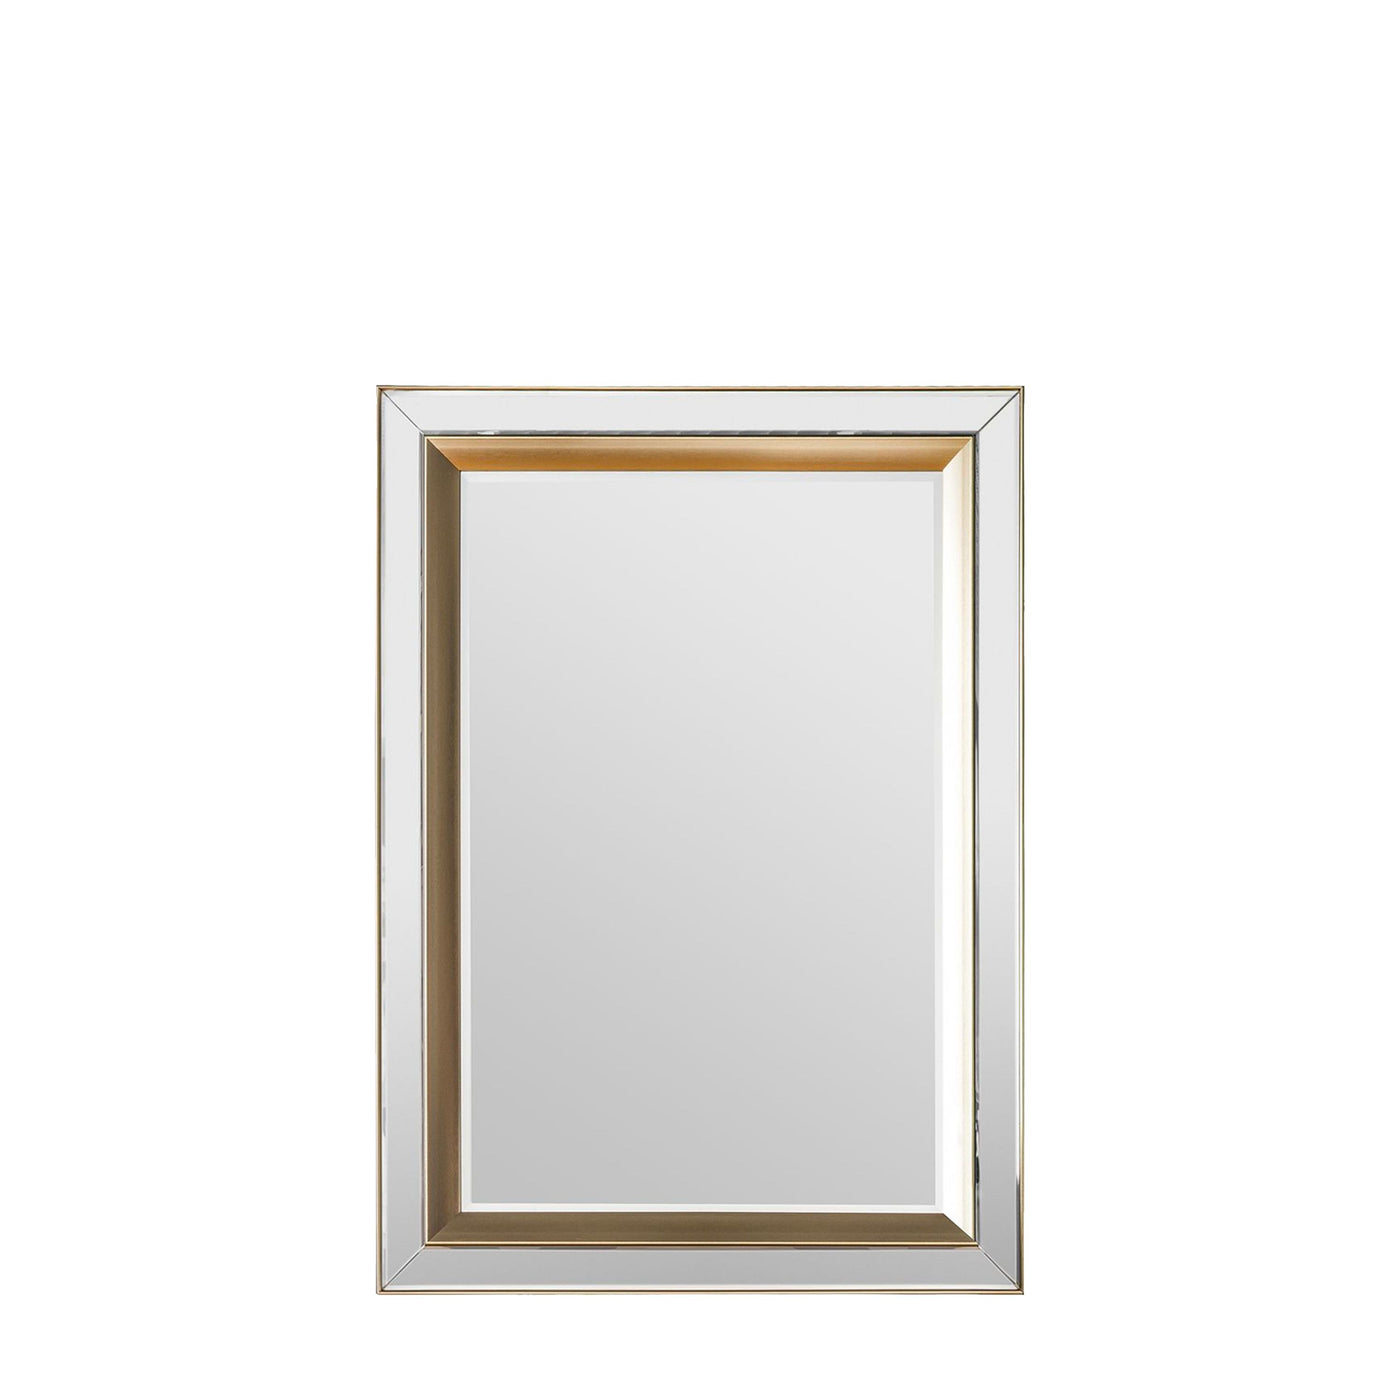 Erney Mirror Rectangle W790 x D30 x H1095mm